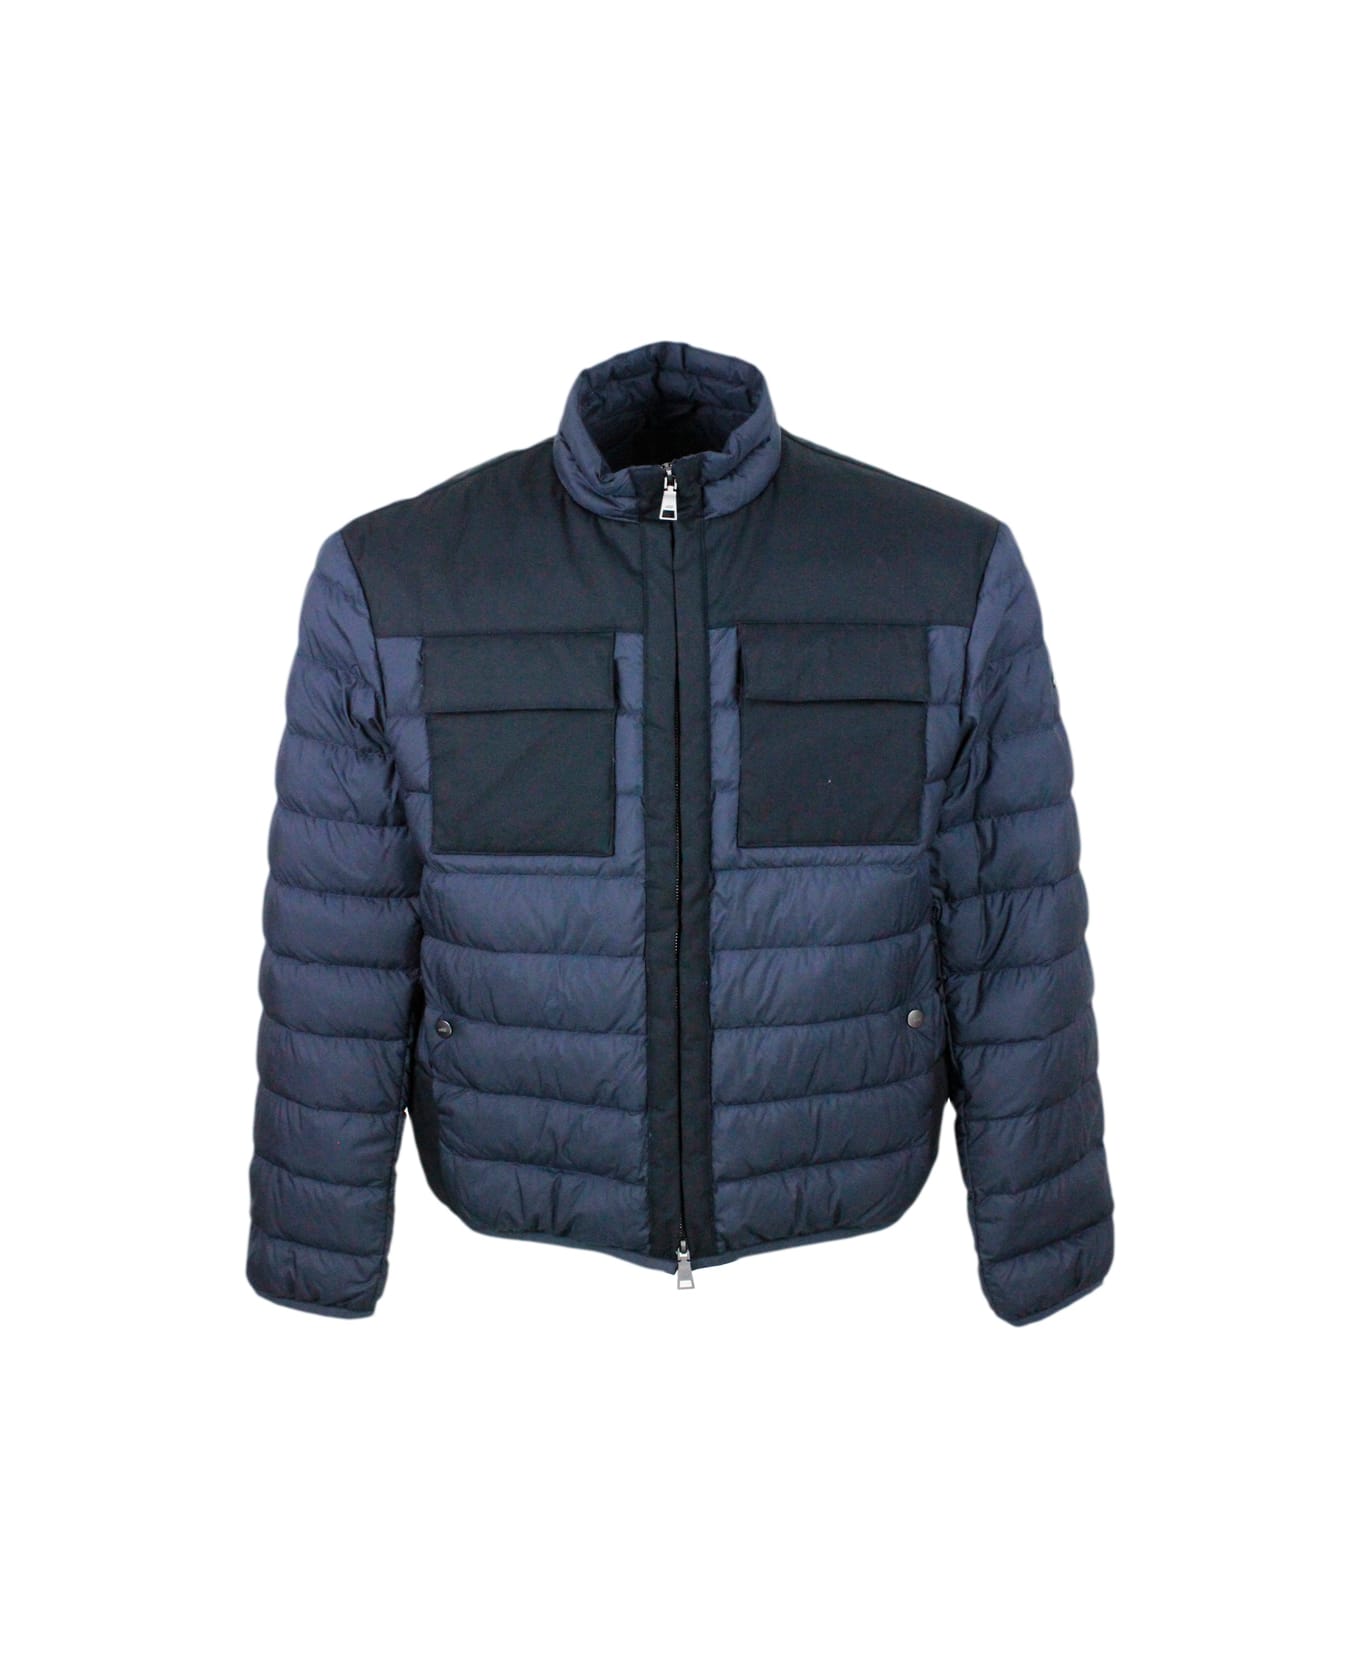 Add 100 Gram Down Jacket With High Quality Feathers. Technical Fabric Details And Chest Pockets. The Closure Is With Zip - Dark blu